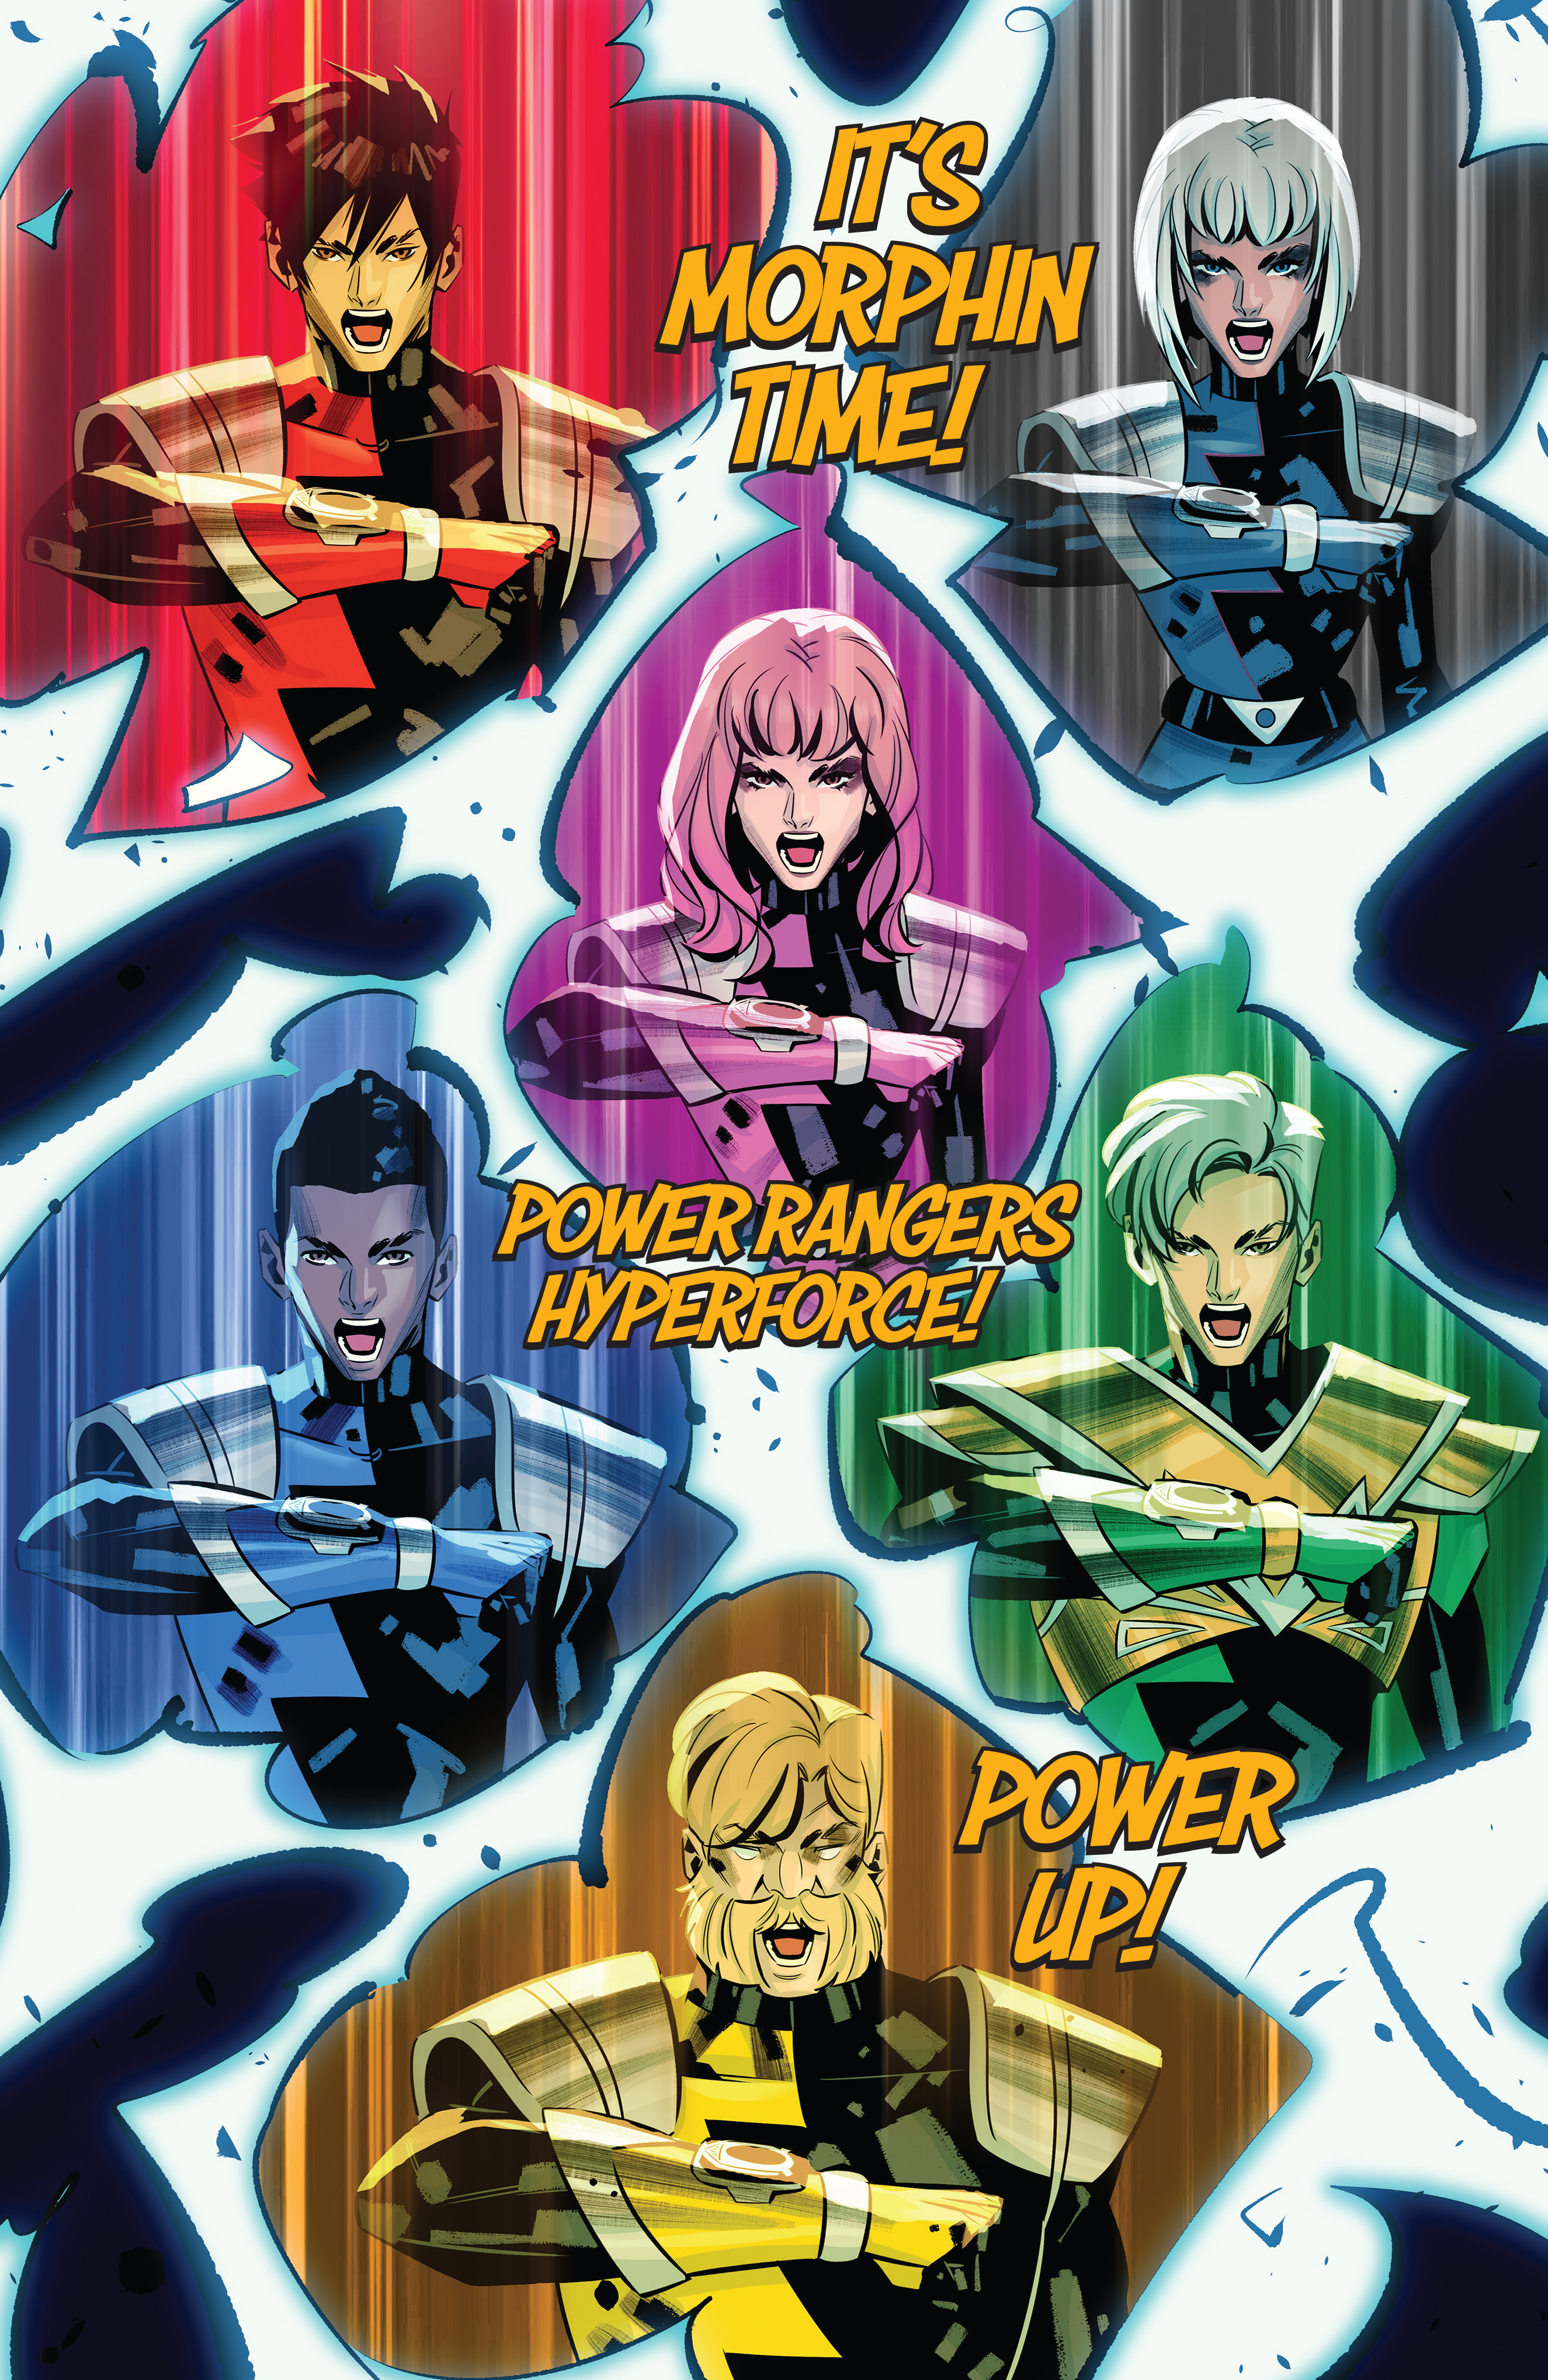 Read online Power Rangers Unlimited comic -  Issue # HyperForce - 30